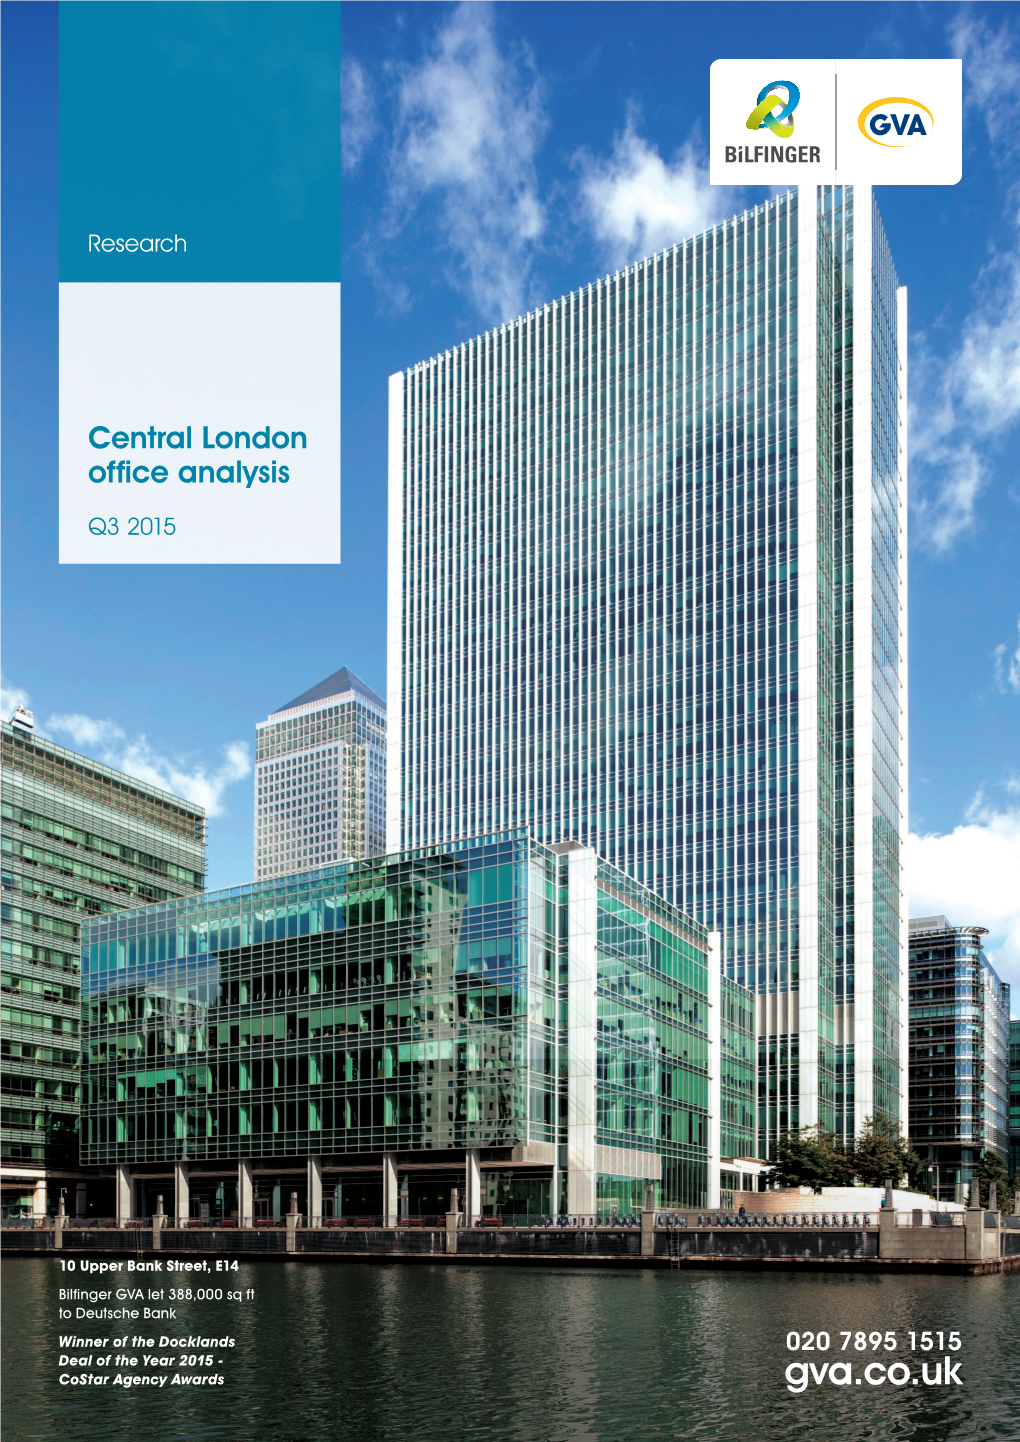 Gva.Co.Uk Welcome to Bilfinger GVA’S Central London Office Analysis; a Detailed Central Account of Our View of the Market Central London in Q3 2015